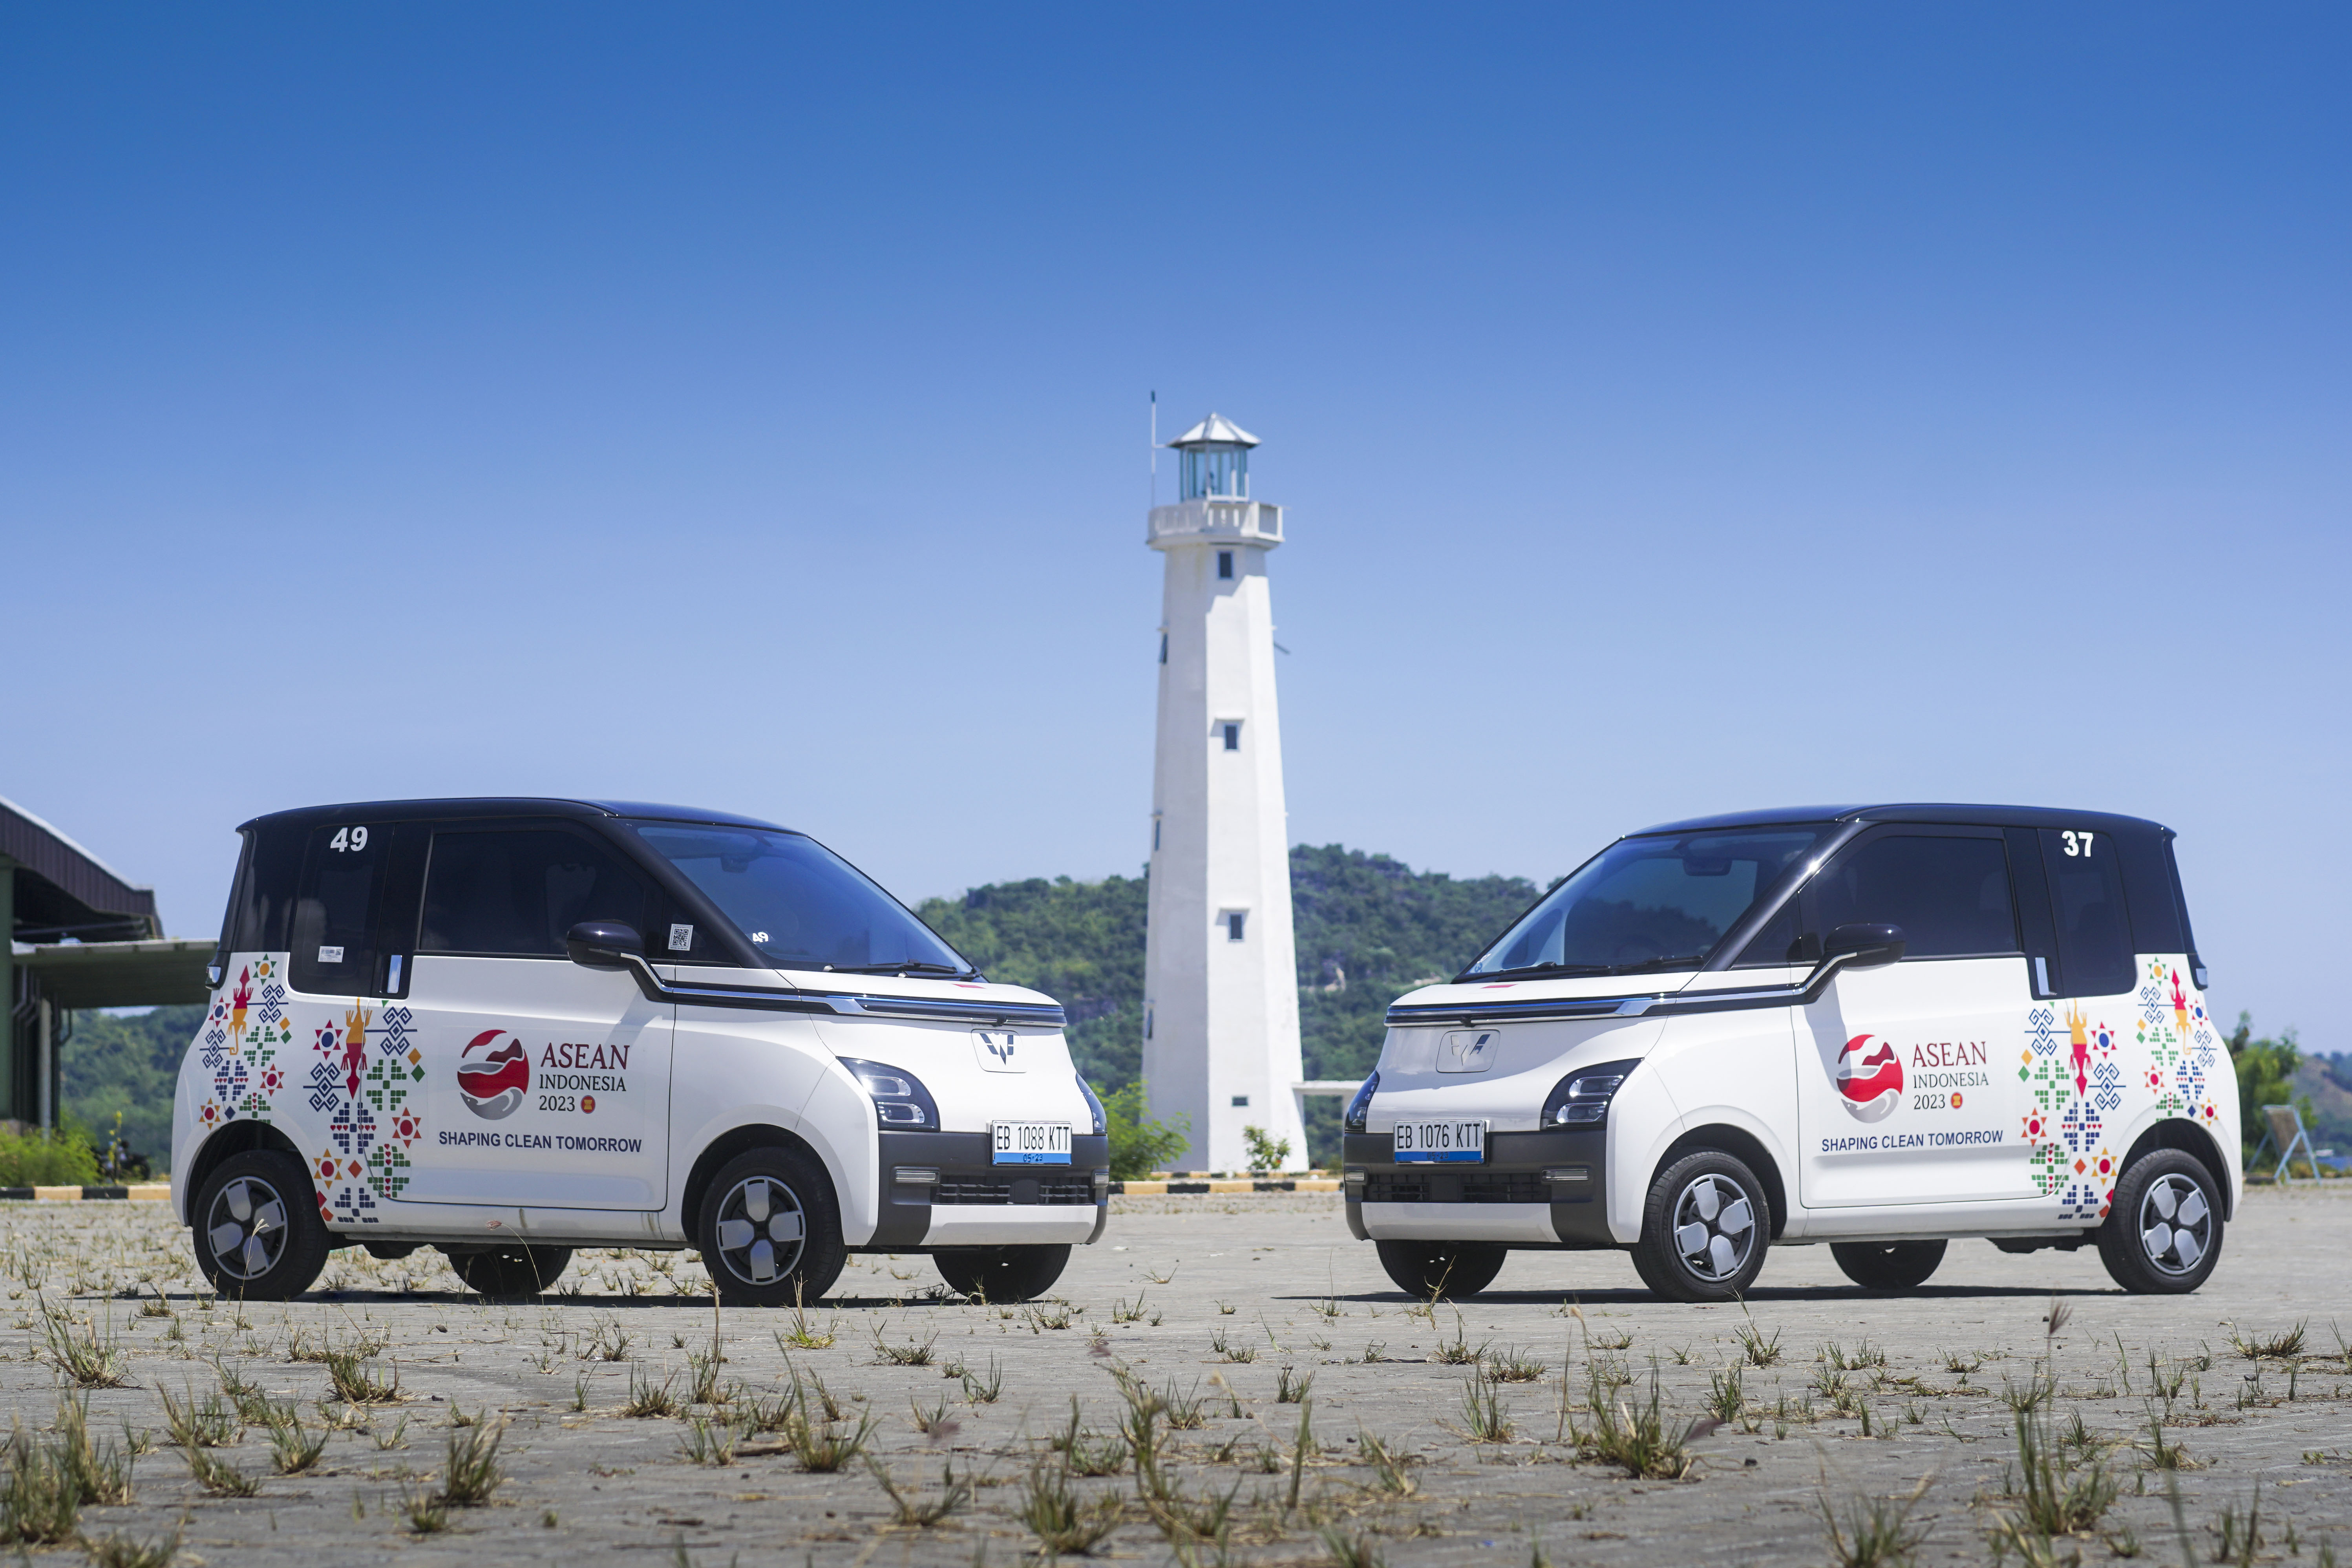 Image Get to Know Wuling Air ev as the Official Car Partner of ASEAN Summit 2023 in Labuan Bajo